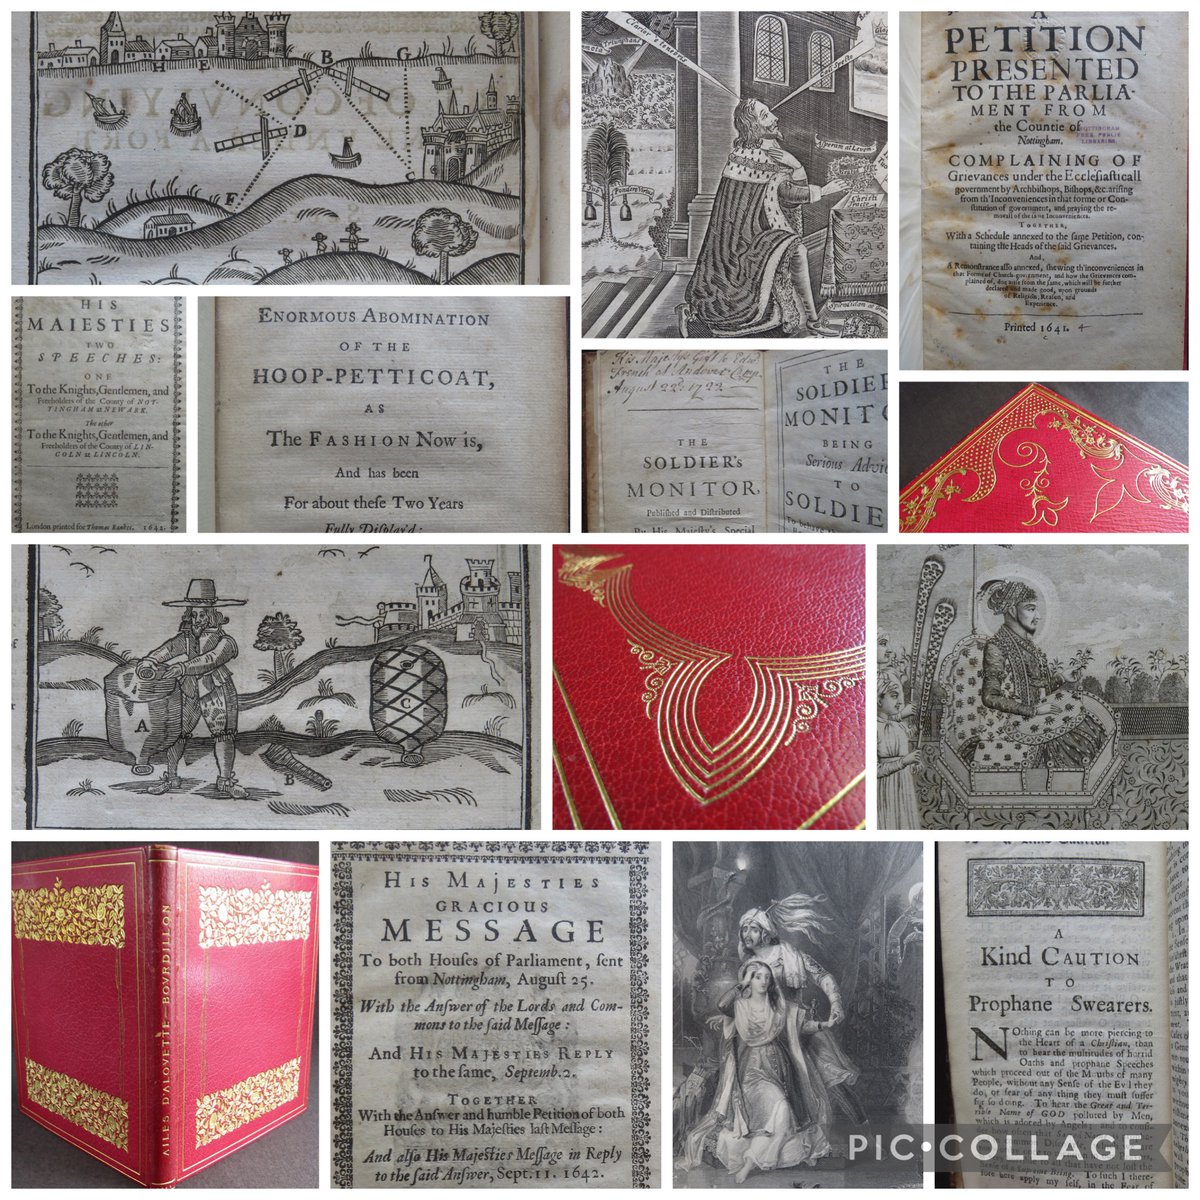 Some of the new, rare, and antiquarian books we have for auction starting tonight from 8pm (UK time)

#antiquarian #bibliophile #history #BookTwitter #rarebooks #bookhistory #earlymodern #finebinding #bookauctions
ebay.co.uk/str/wisdompedl…